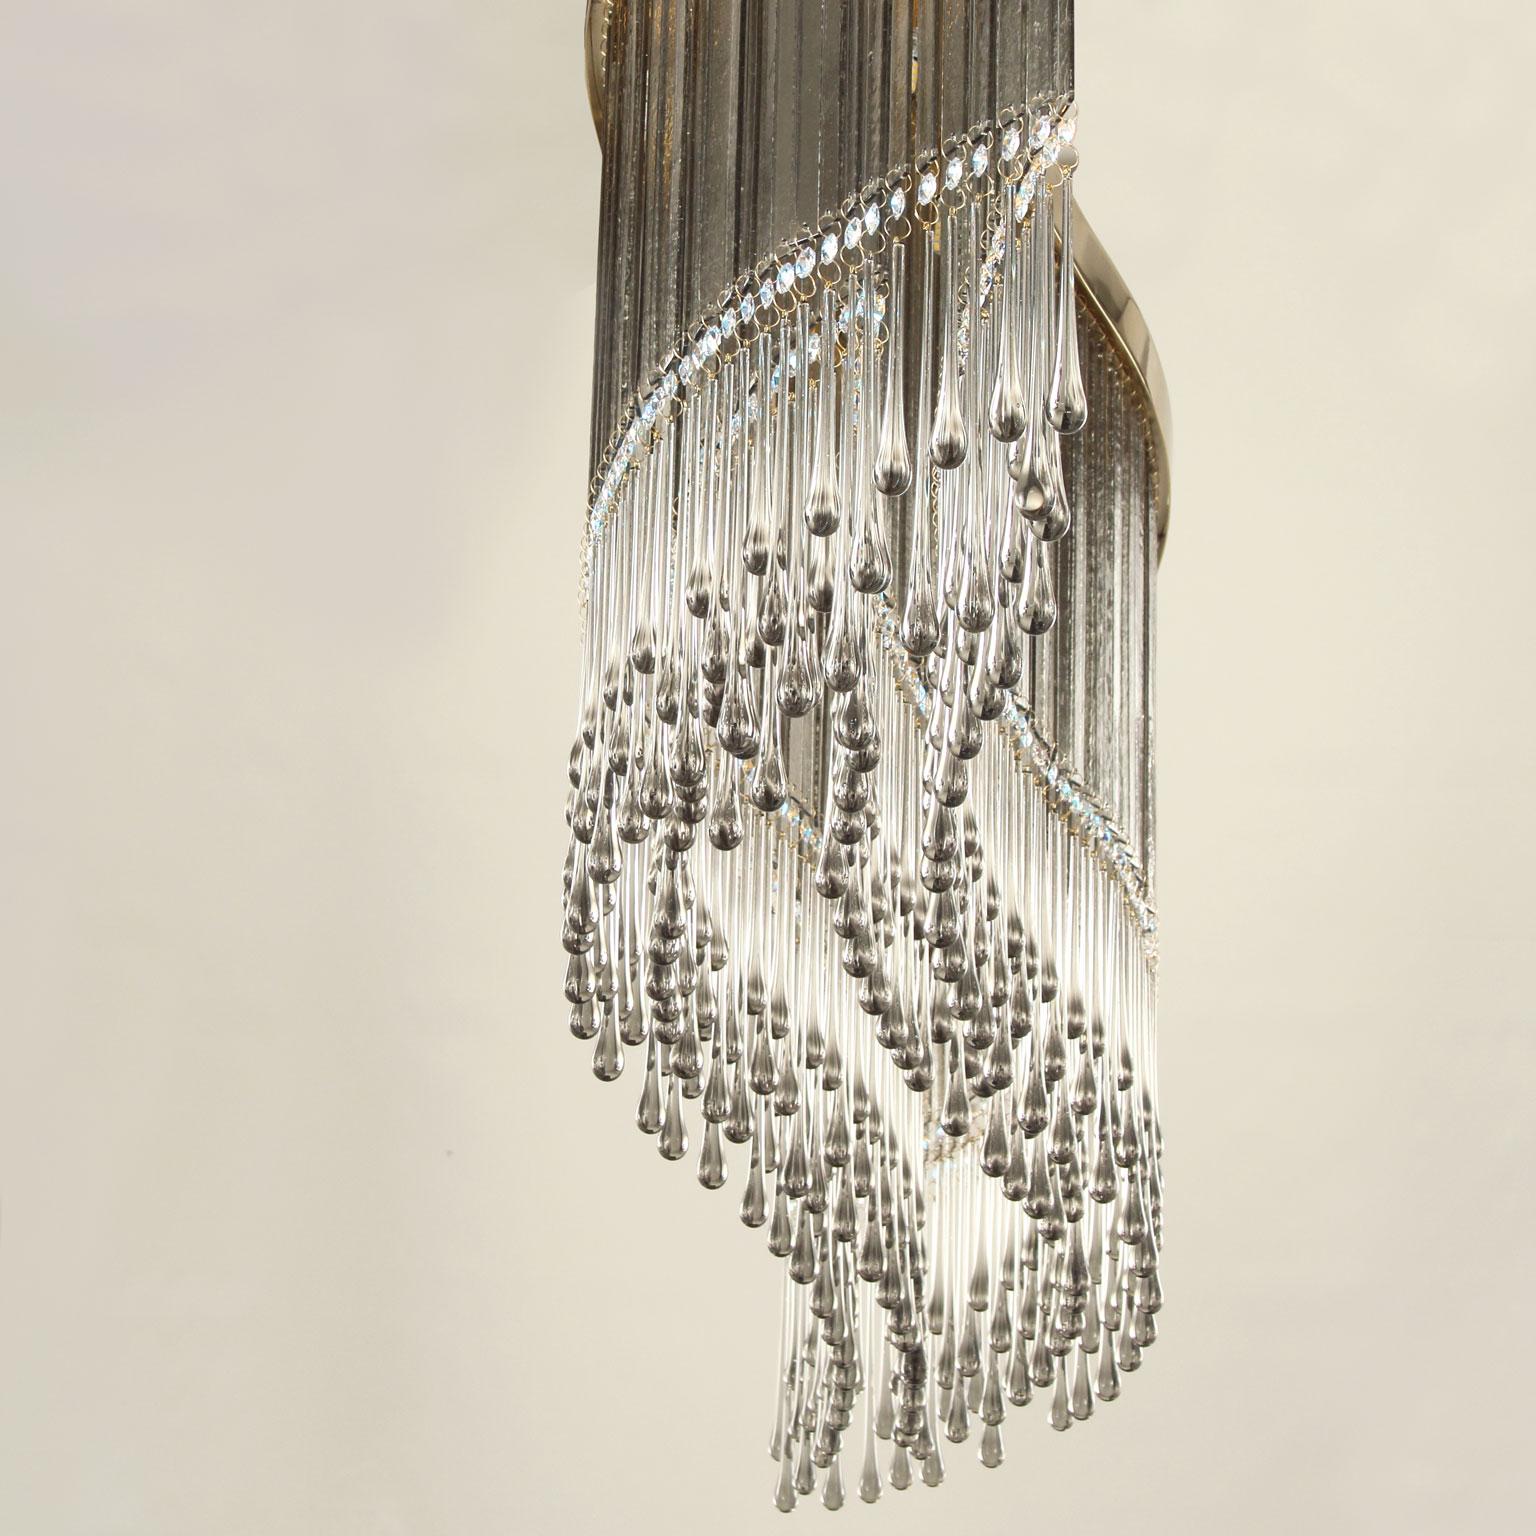 Dancer suspension lamp with grey Murano glass and Swarovski elements by Multiforme.

The Dancer design lamp is our interpretation of the traditional crystal and glass chandeliers. The whole structure of this suspension lamp is composed of a cascade